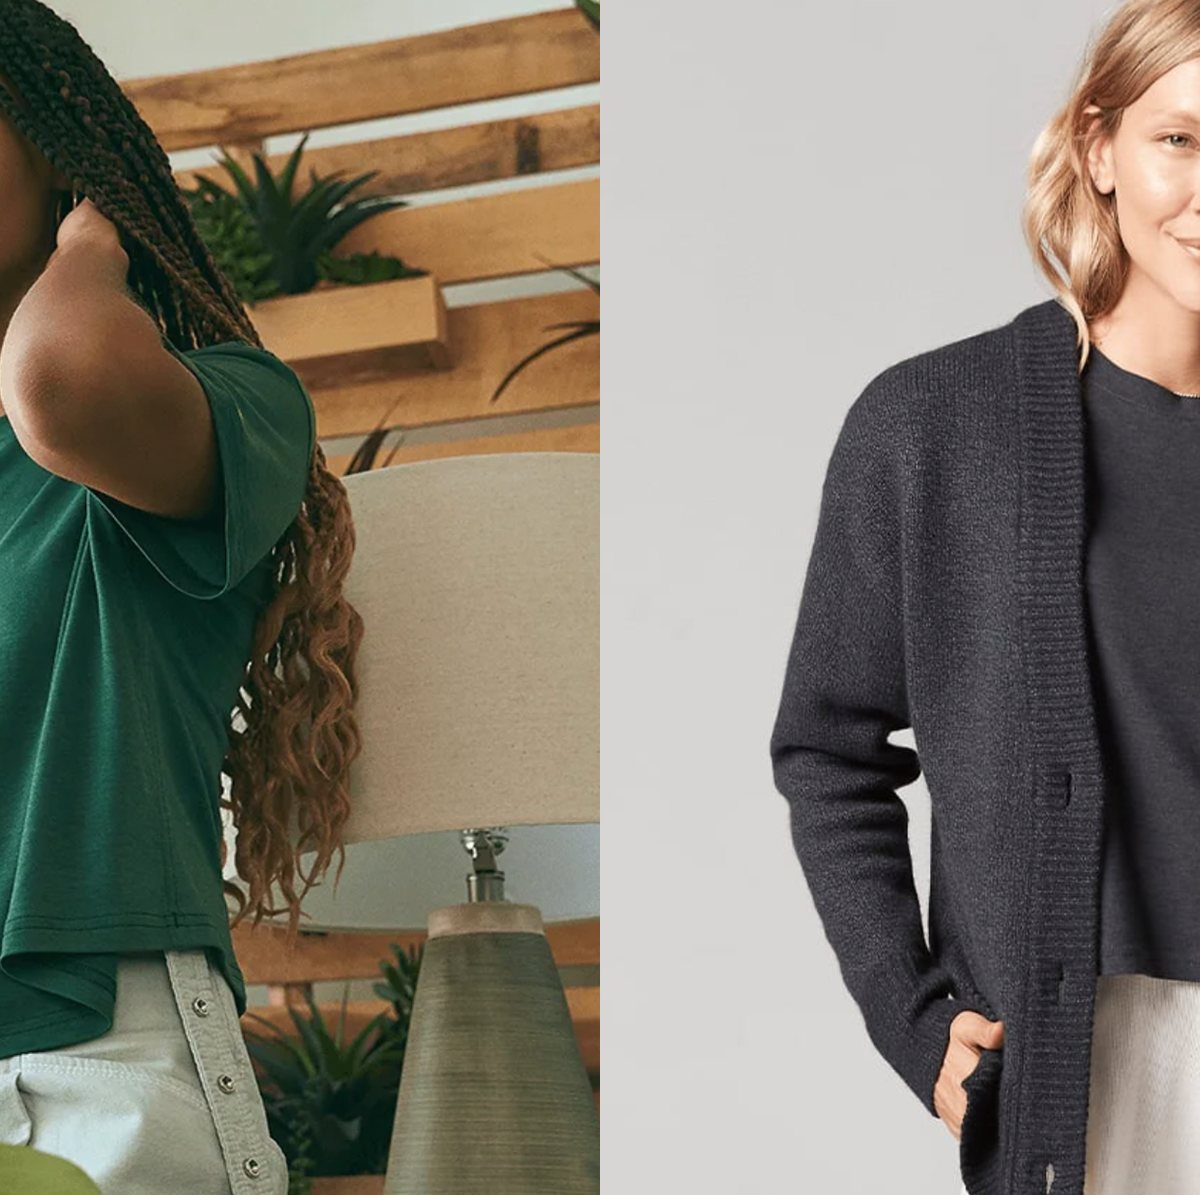 Allbirds to Sell Wool and Tree-Based Workout Clothes, Taking on